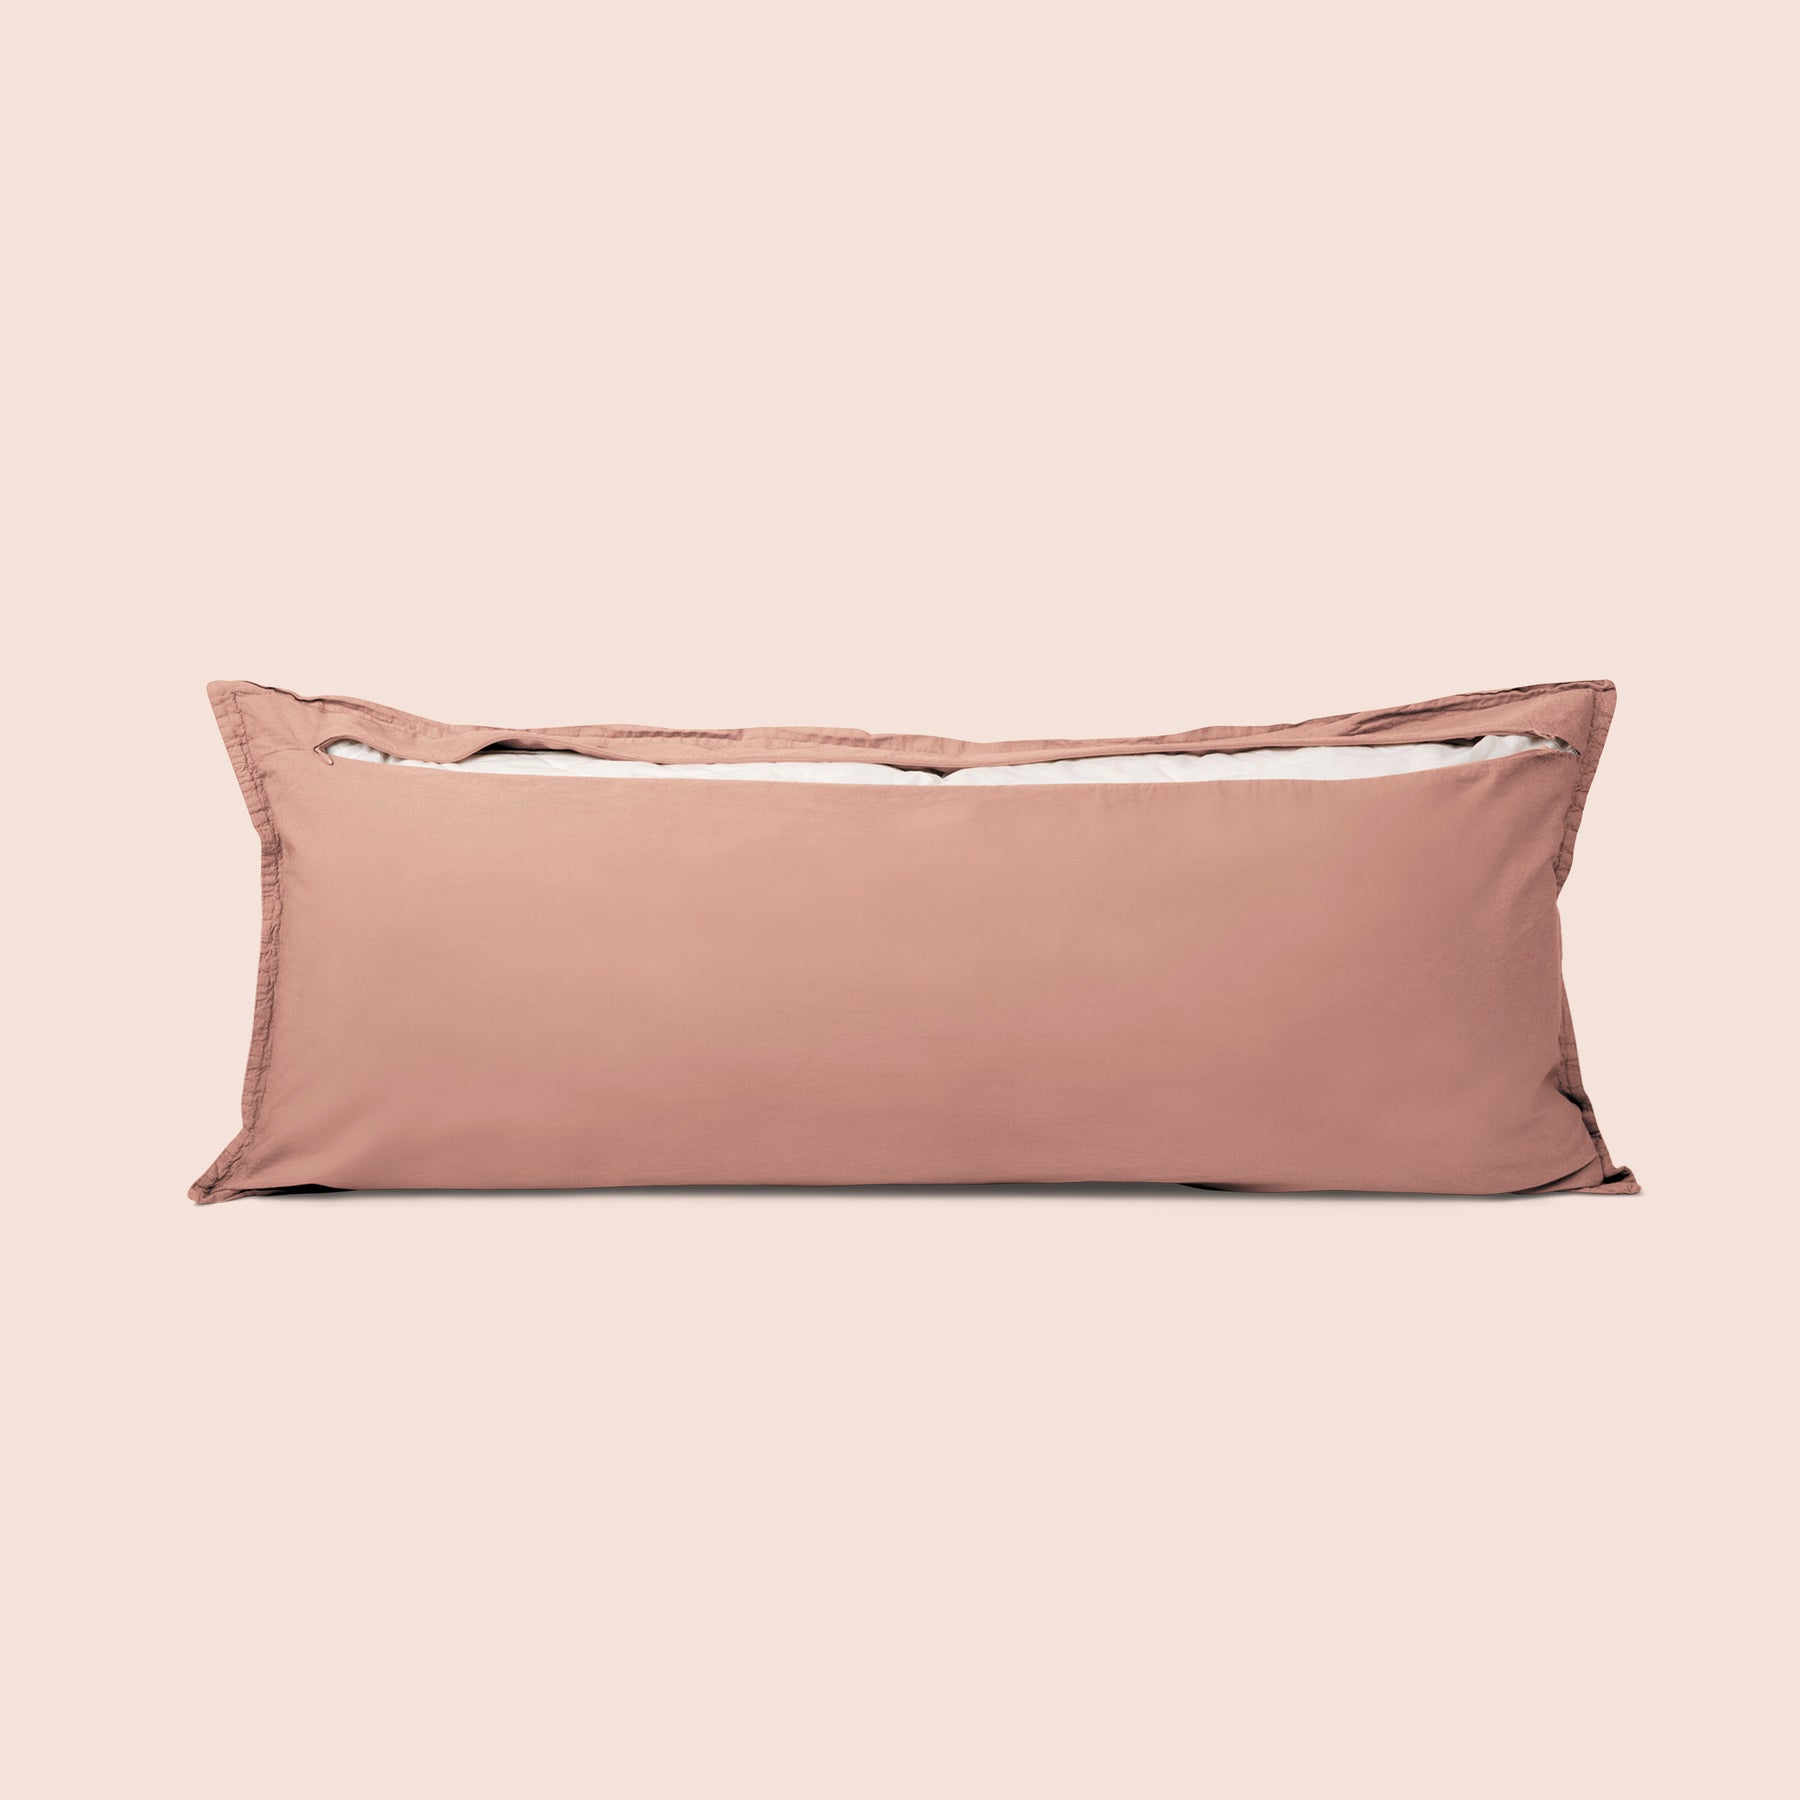 Image of the back of the Pink Sandstone Garment Washed Percale Lumbar Pillow Cover on a lumbar pillow with the back zipper open on a light pink background